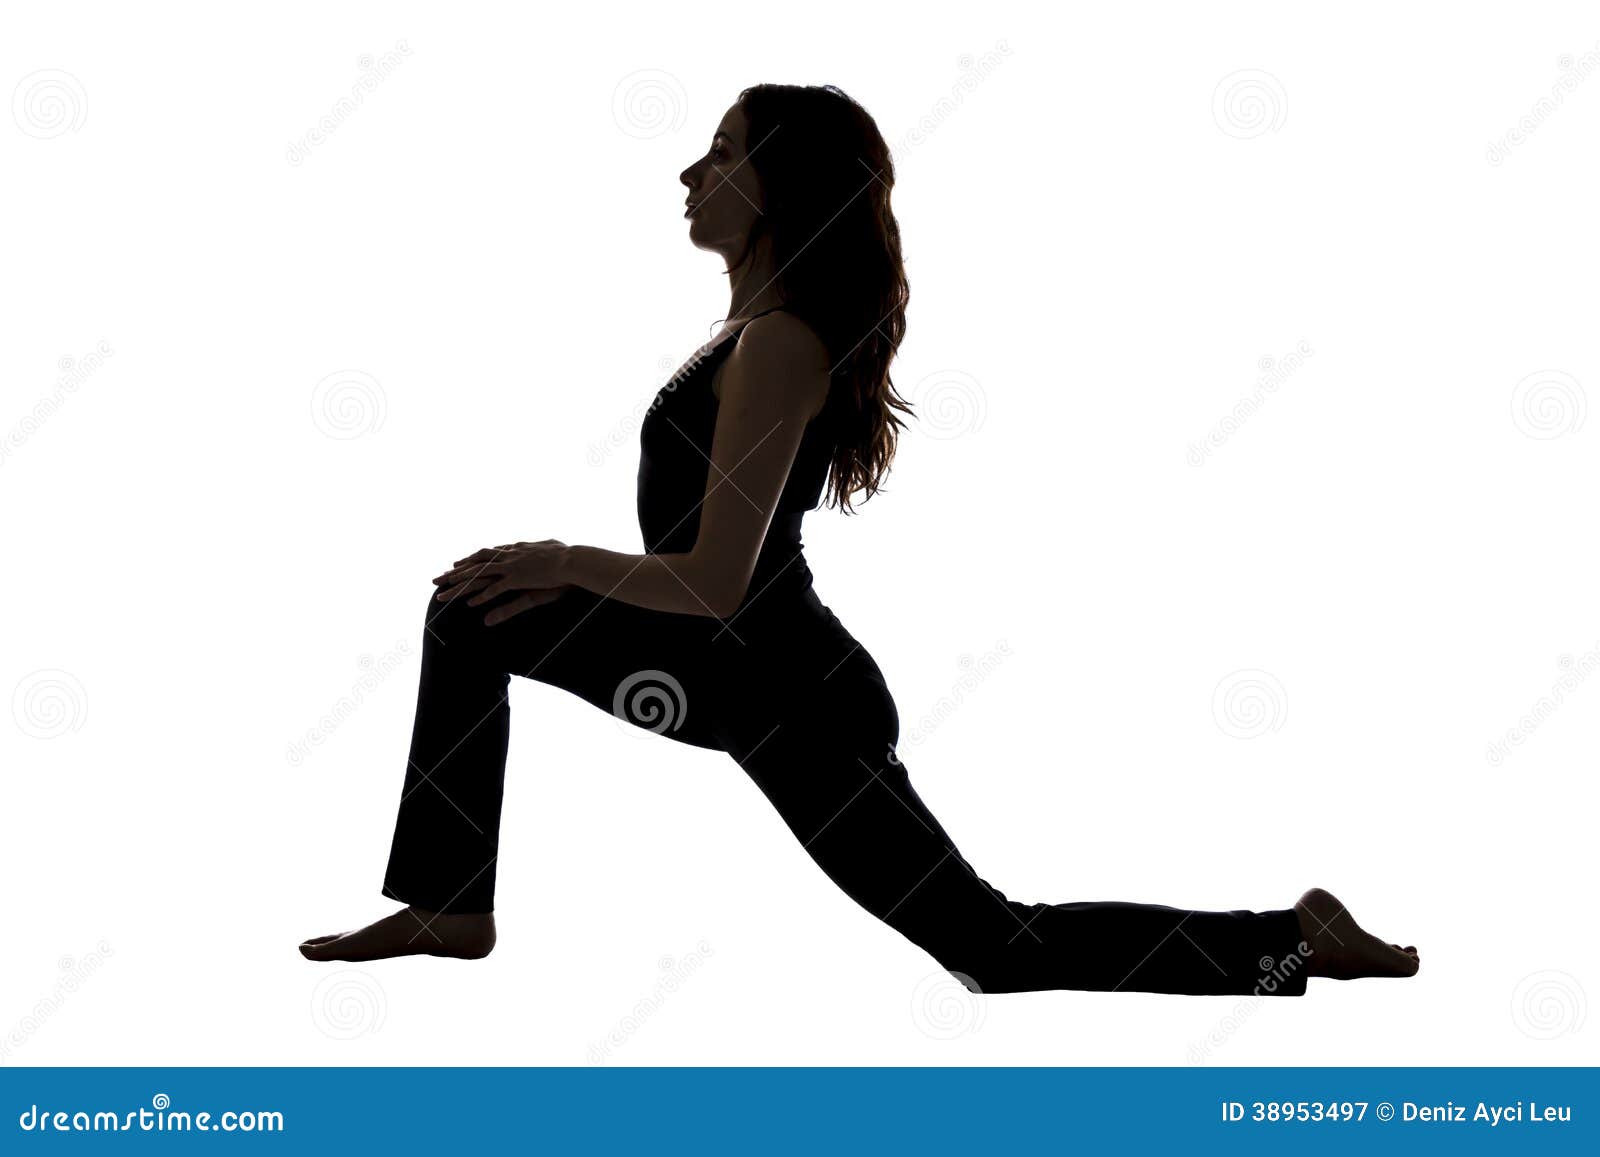 Hip Opening Yoga Poses Vector Illustration Black And White Stock  Illustration - Download Image Now - iStock